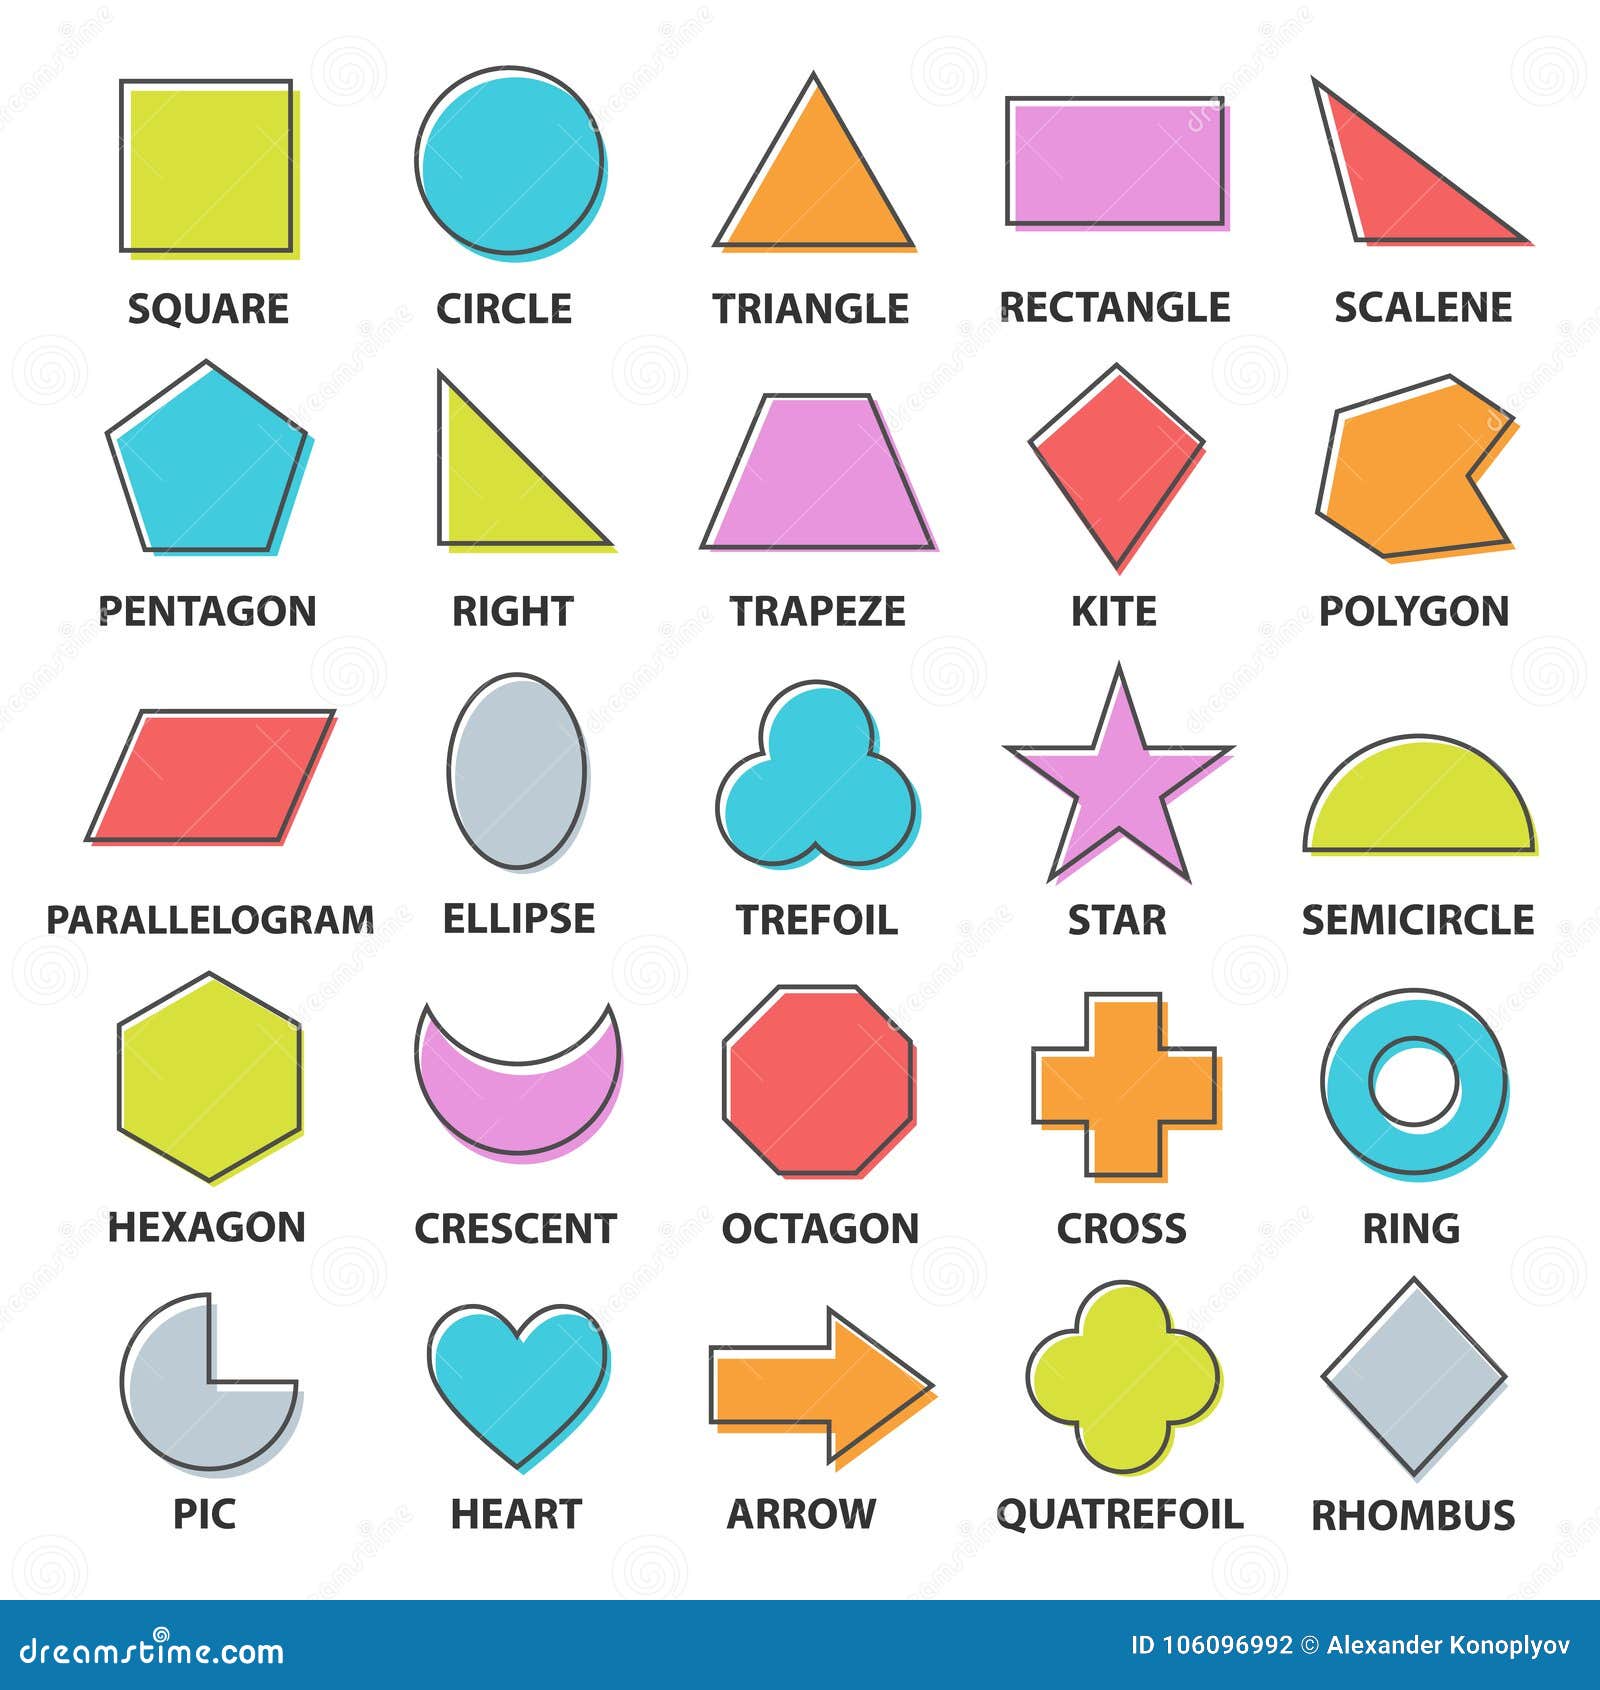 Collection of basic 2D shapes for kids learning, colorful